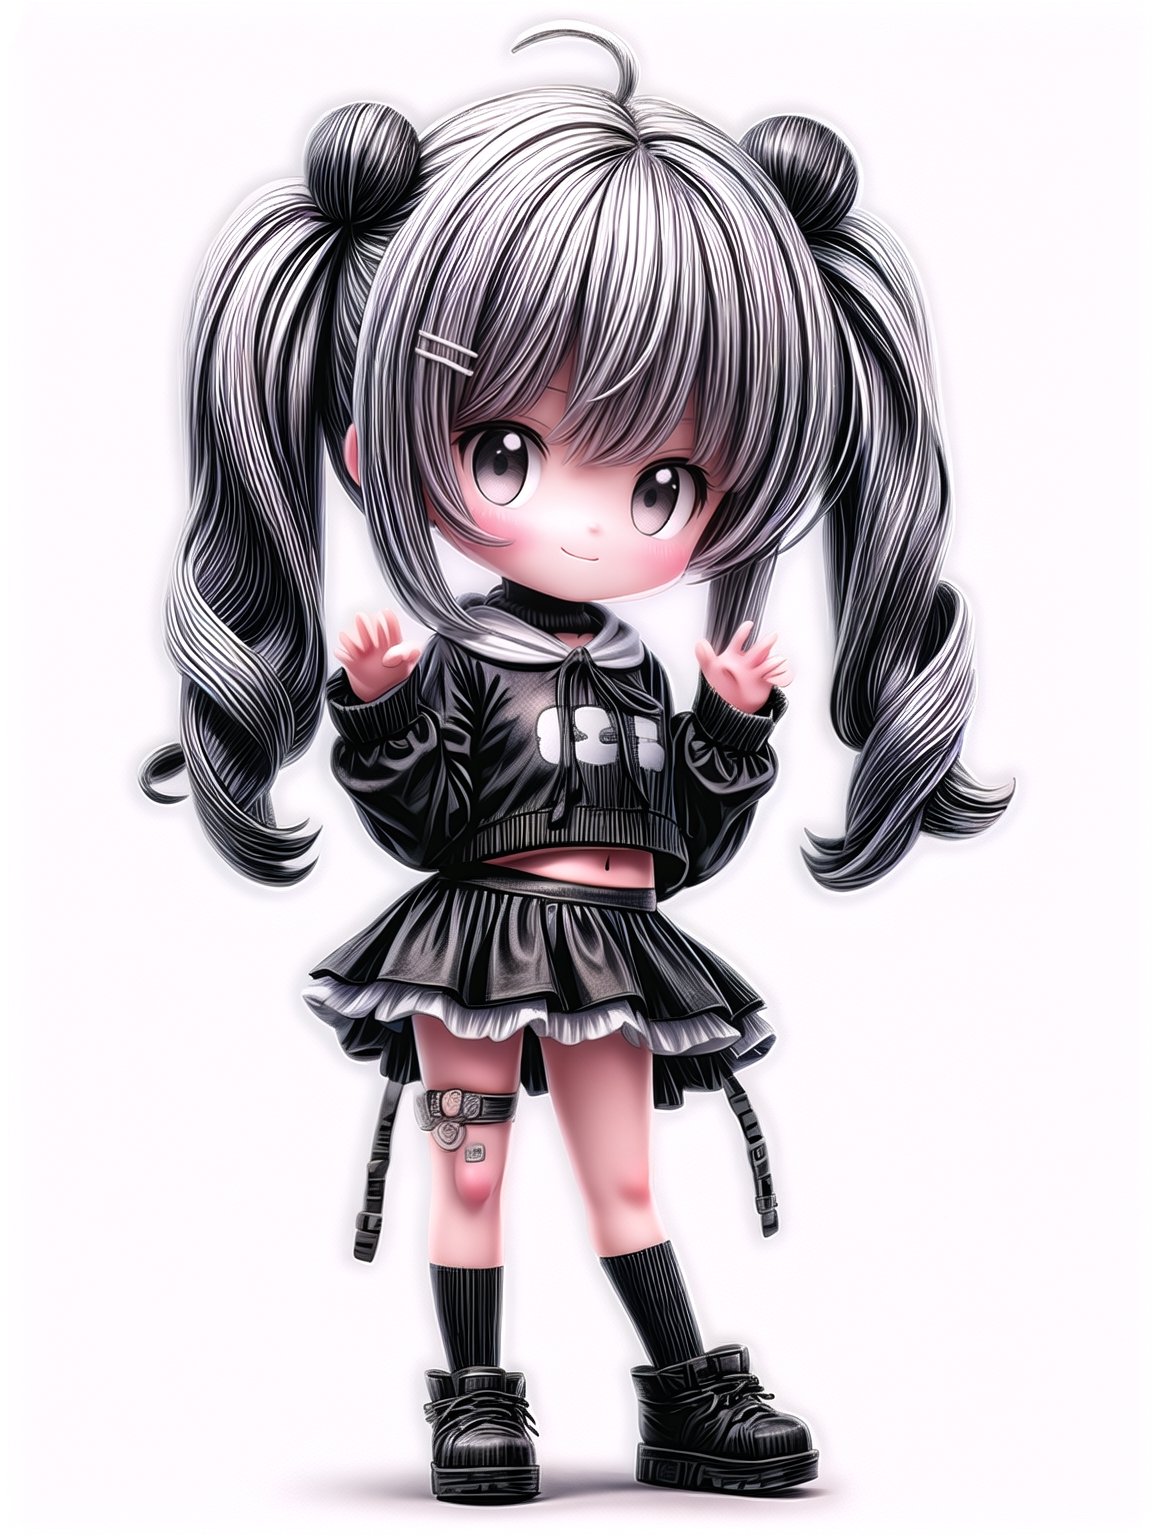 ((Sticker)),(( a cute girl)) white mini skirt and short T-shirt,hair clip in lovely black and white hair, glossy lips, big cute eyes, white background((cute pose)),4K, 2.5D ,chibi,full body,Haute_Couture,edgCT 